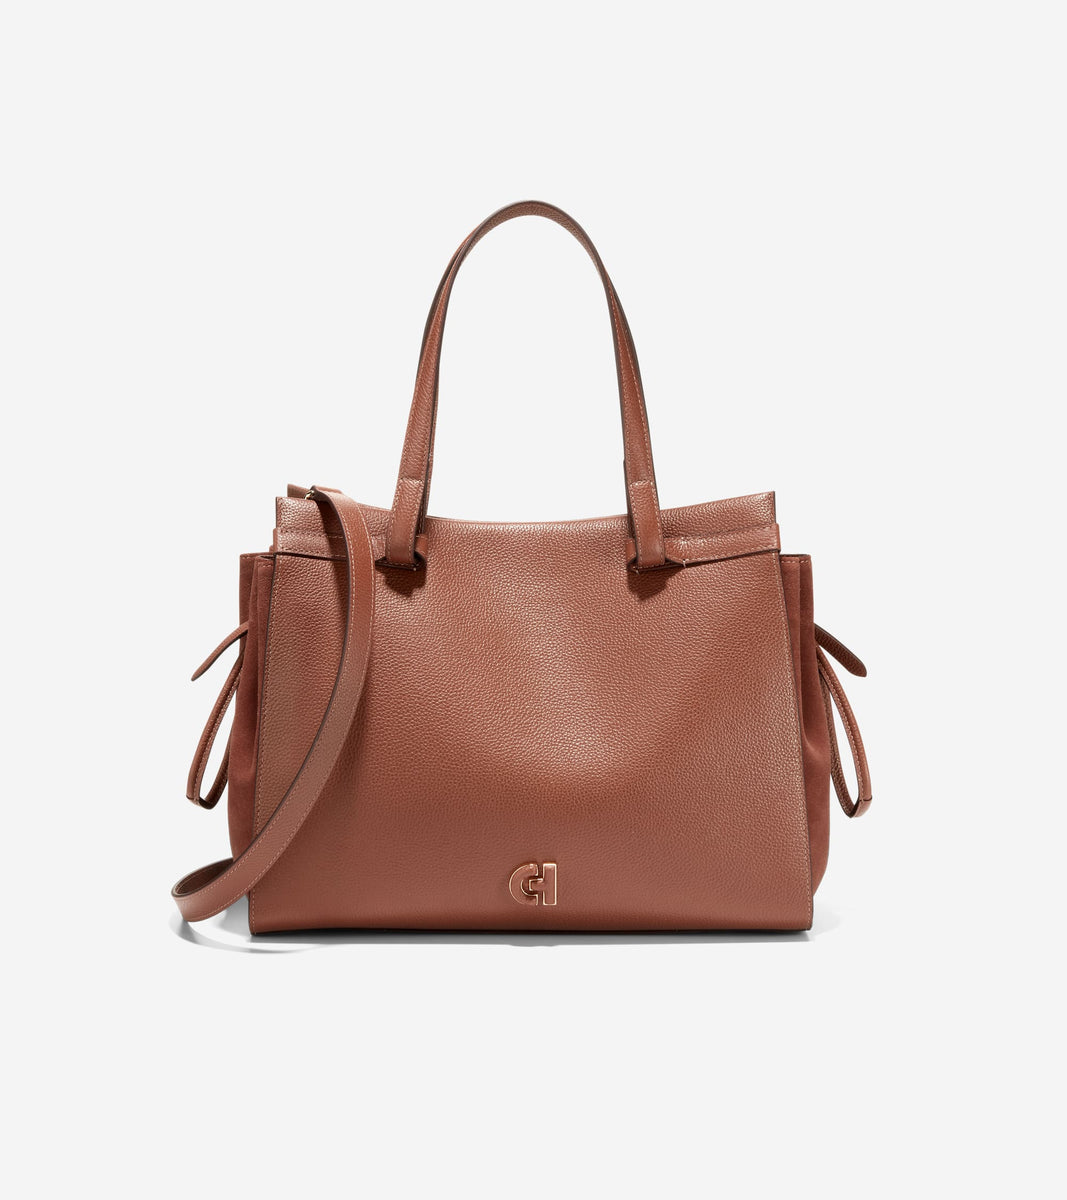 Cole Haan Leather Purse | Clothing and Apparel | ksl.com